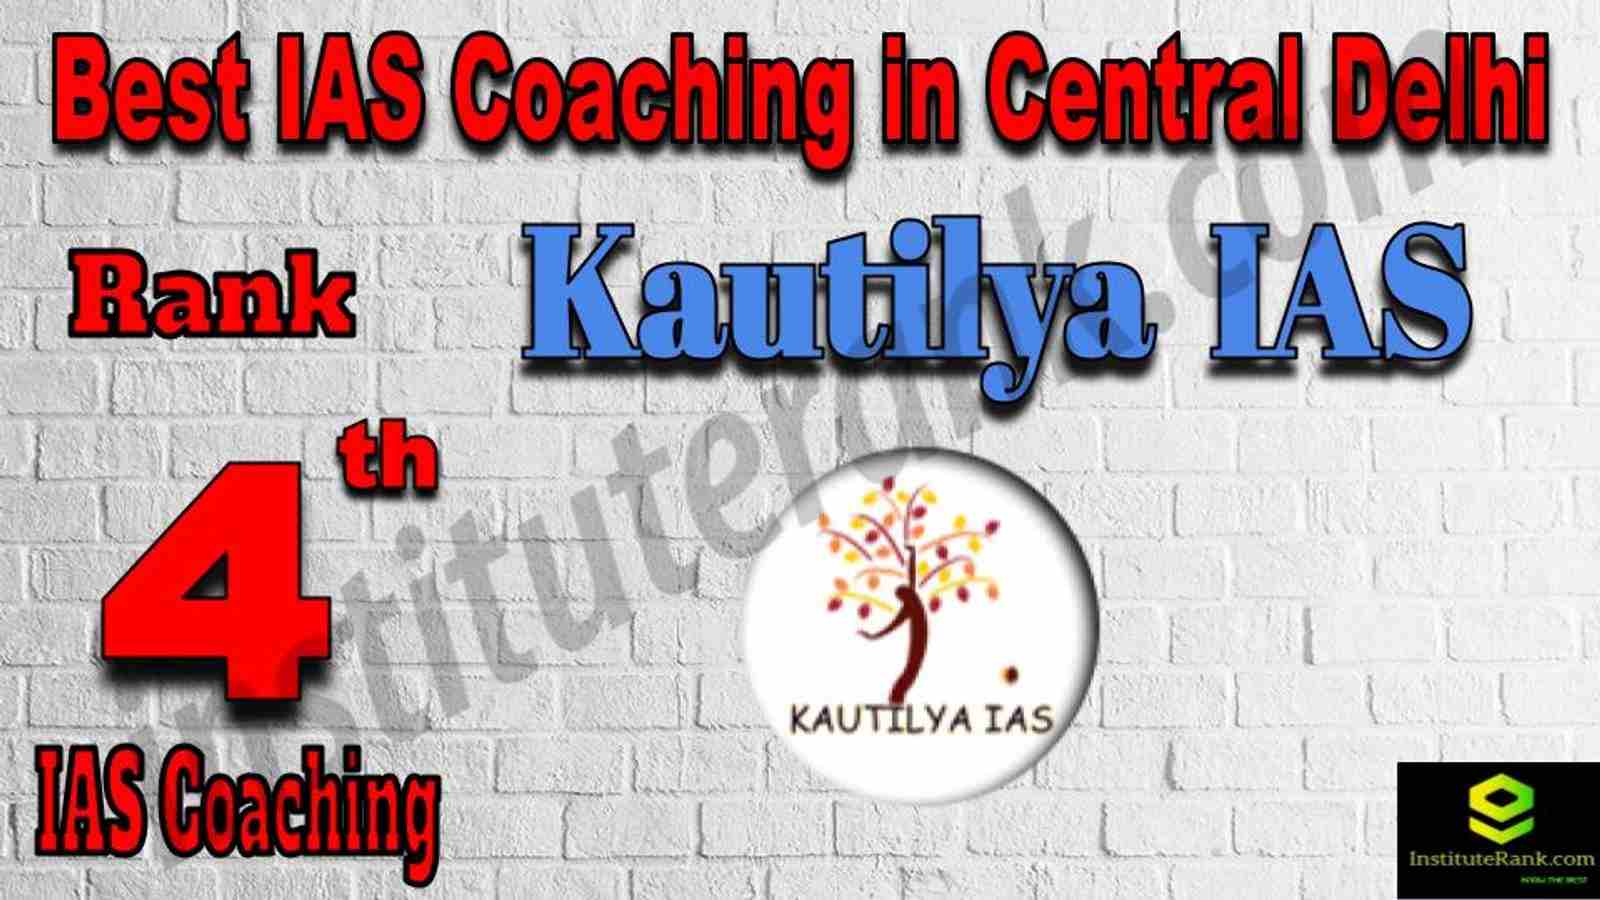 4th Best IAS Coaching in Central Delhi